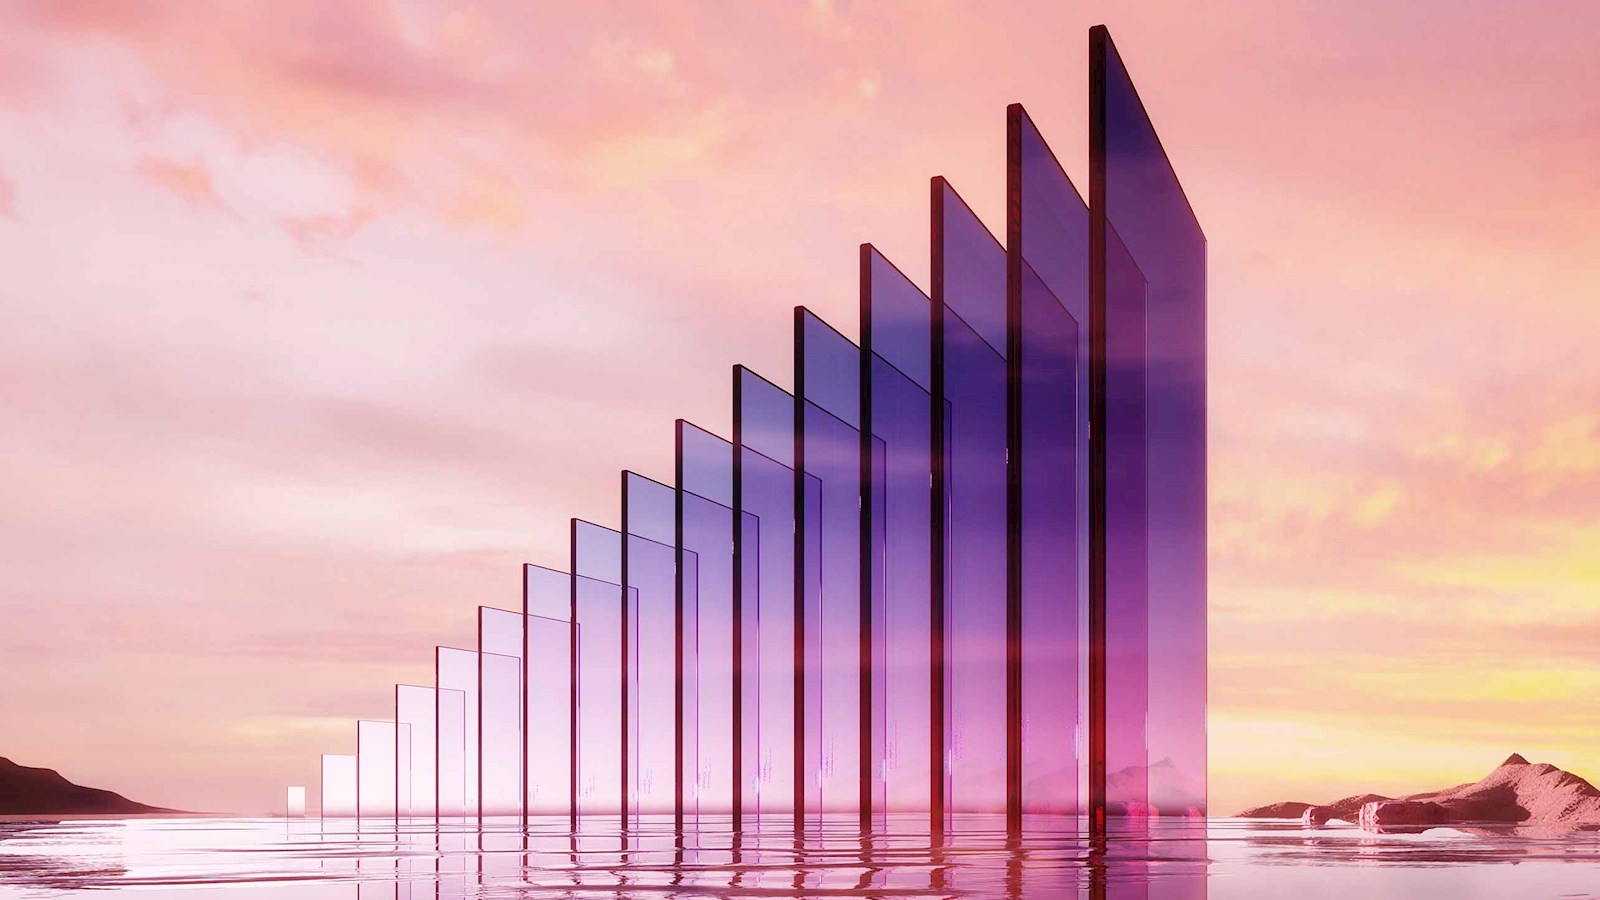 Purple perspex panels growing in size from small to large, with a sunset in the background and water reflection in the foreground